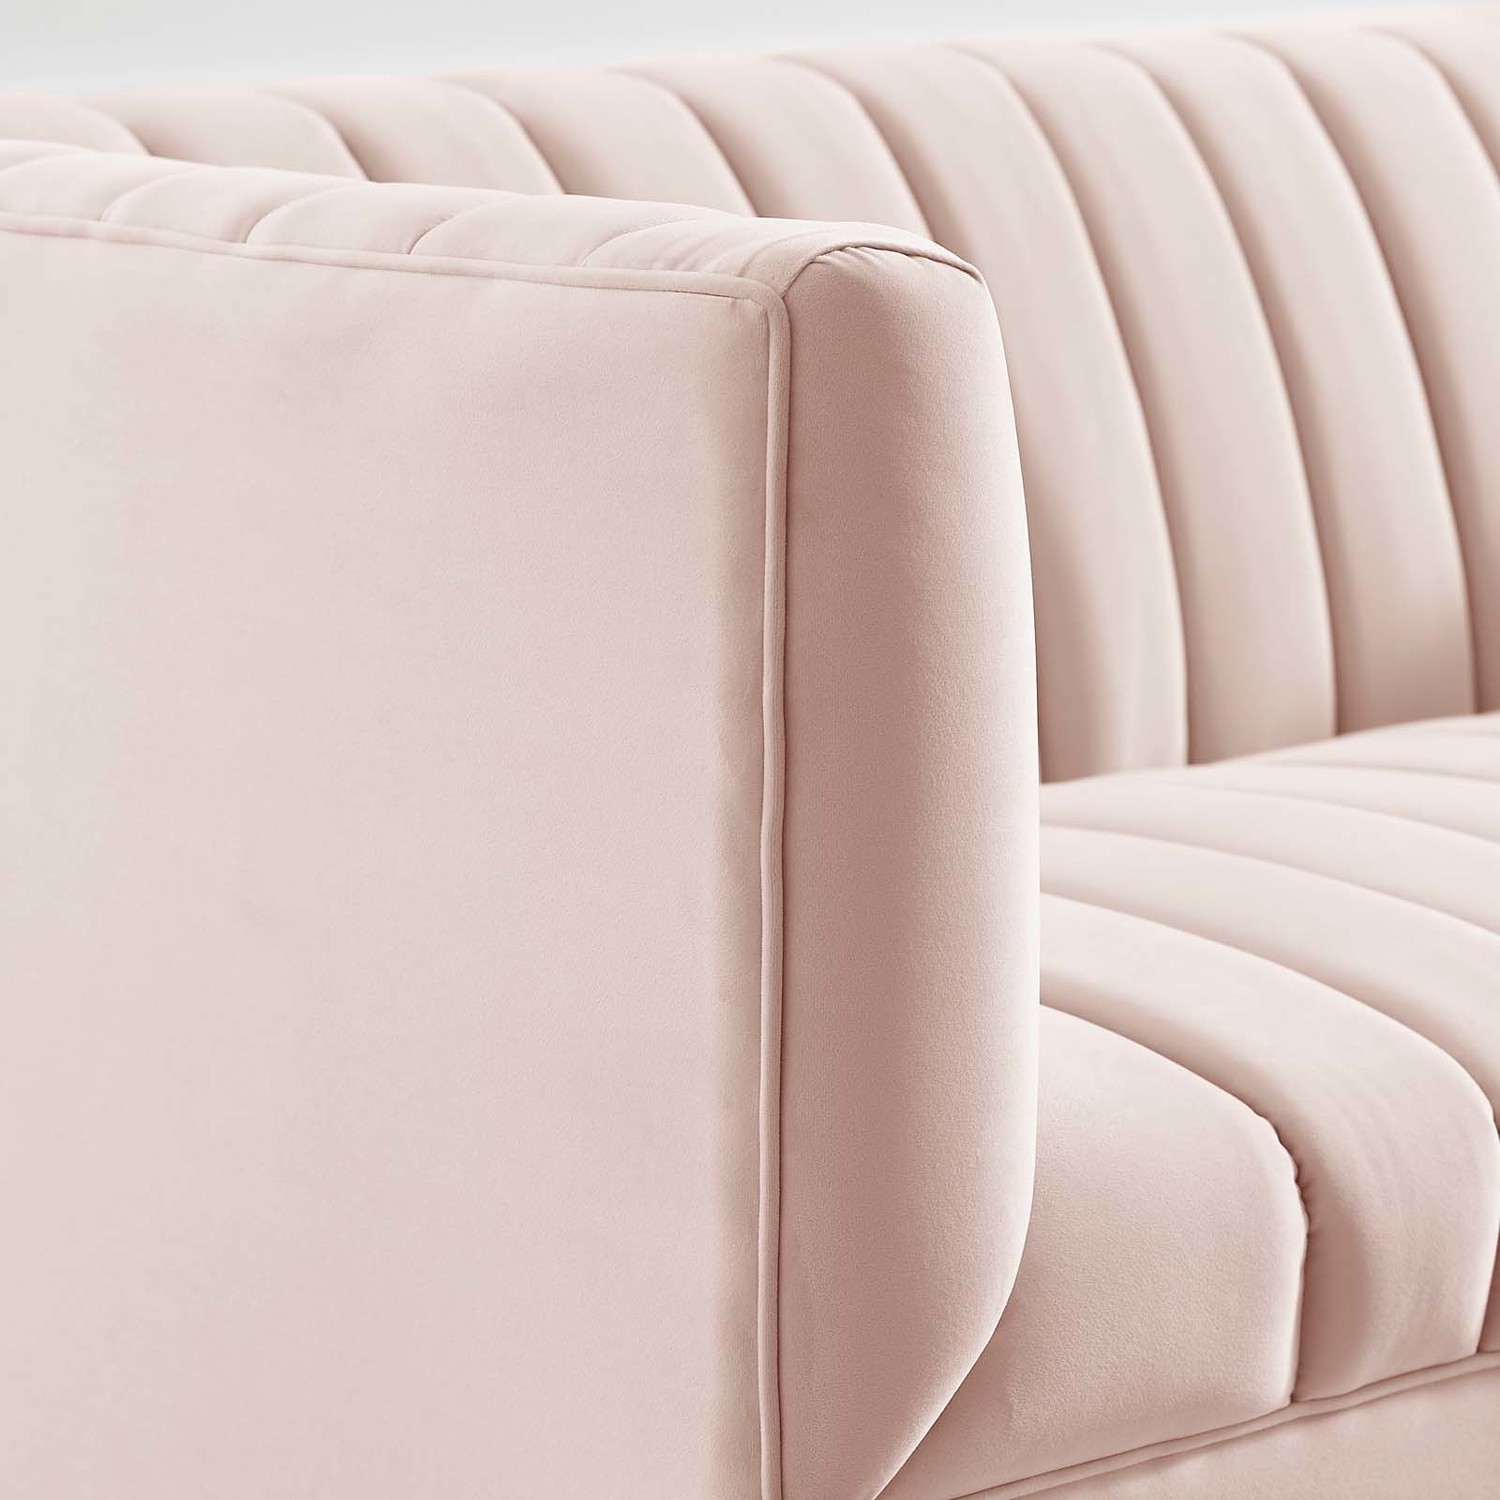 small couches Modway Furniture Sofas and Armchairs Pink